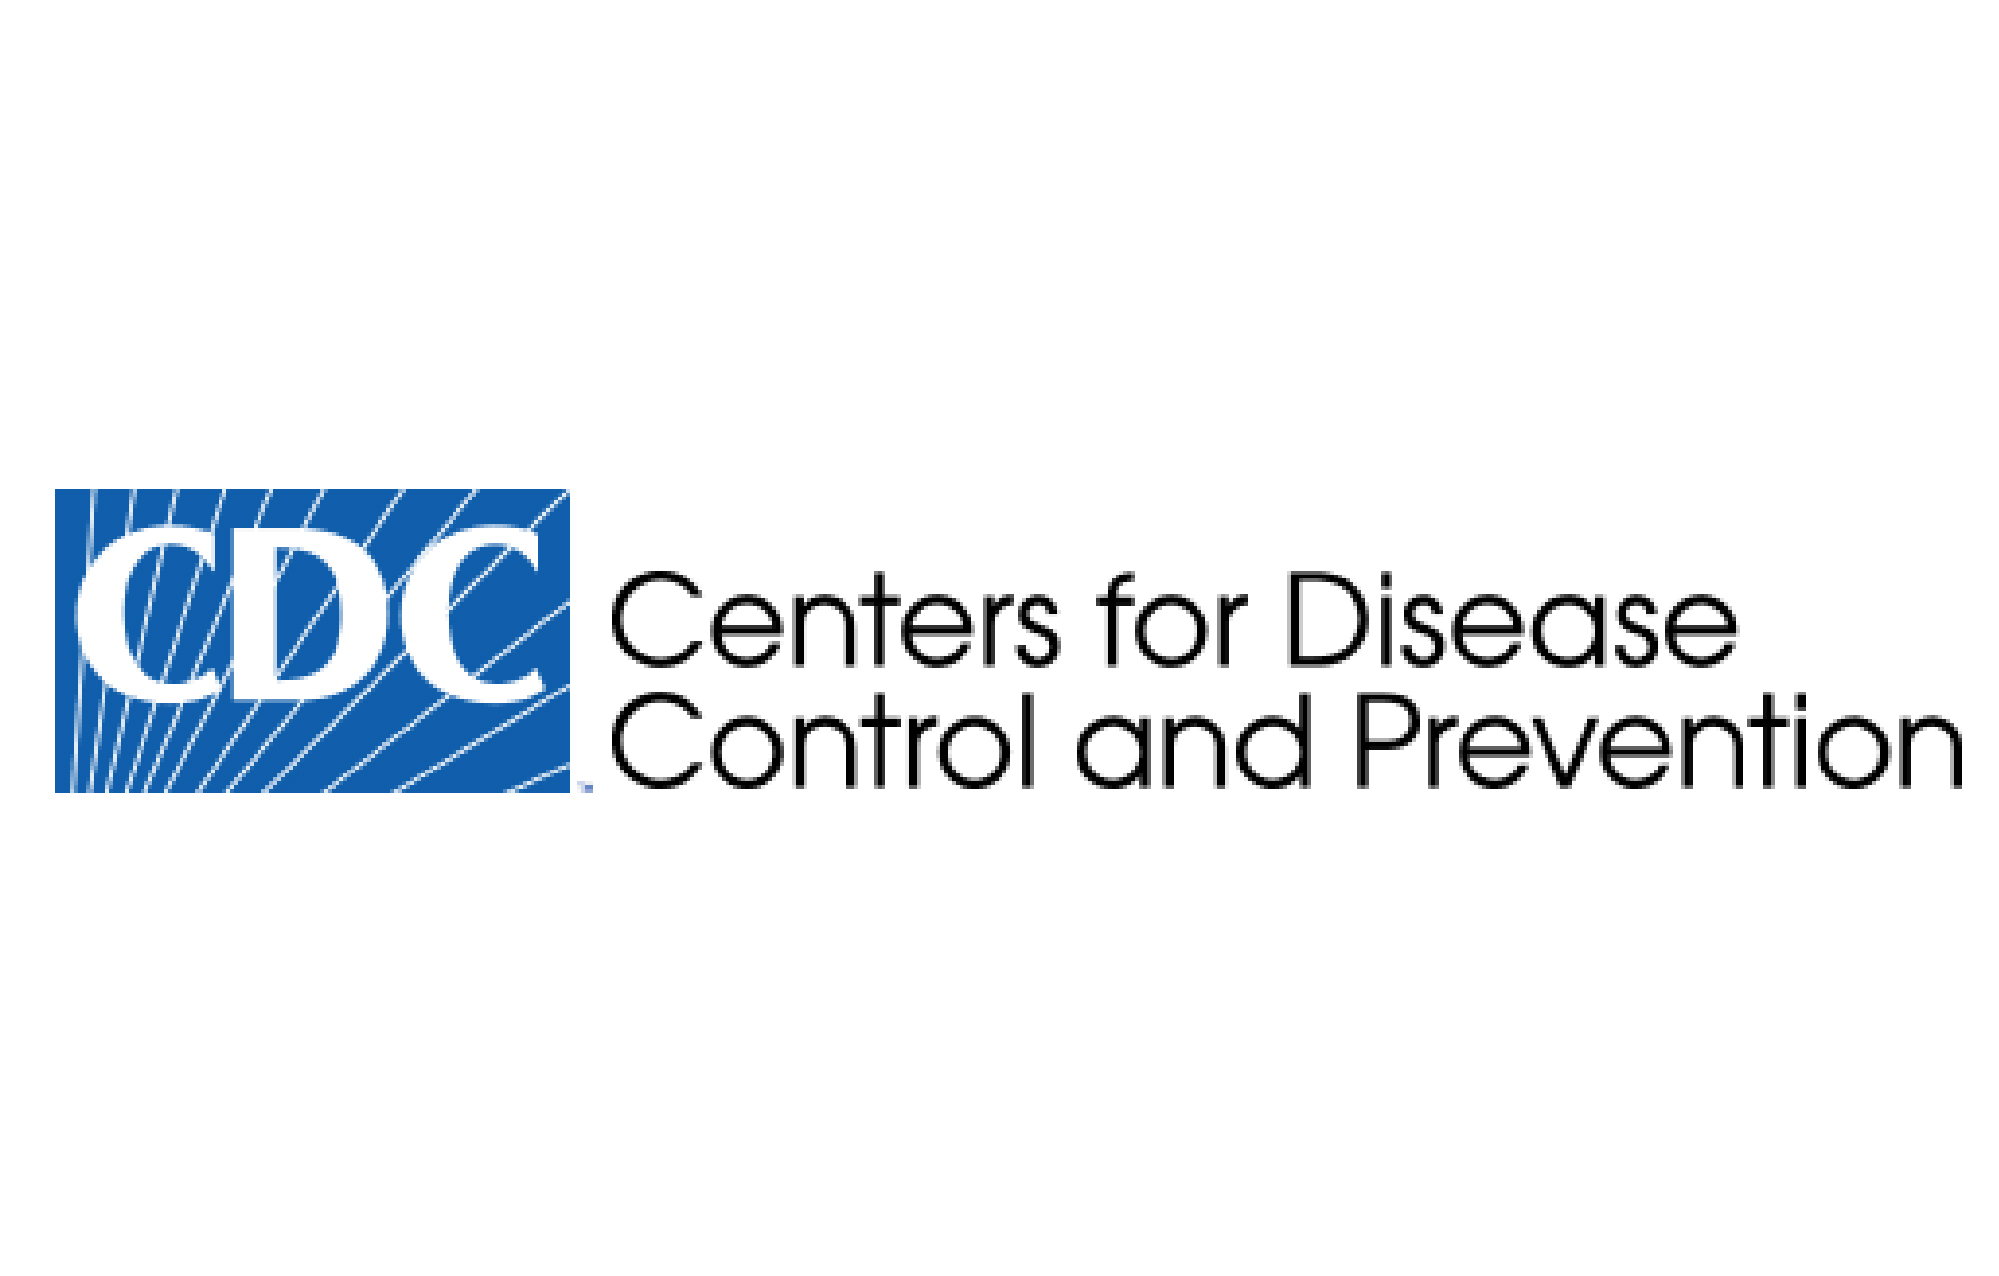 CDC:  Centers for Disease Control and Prevention